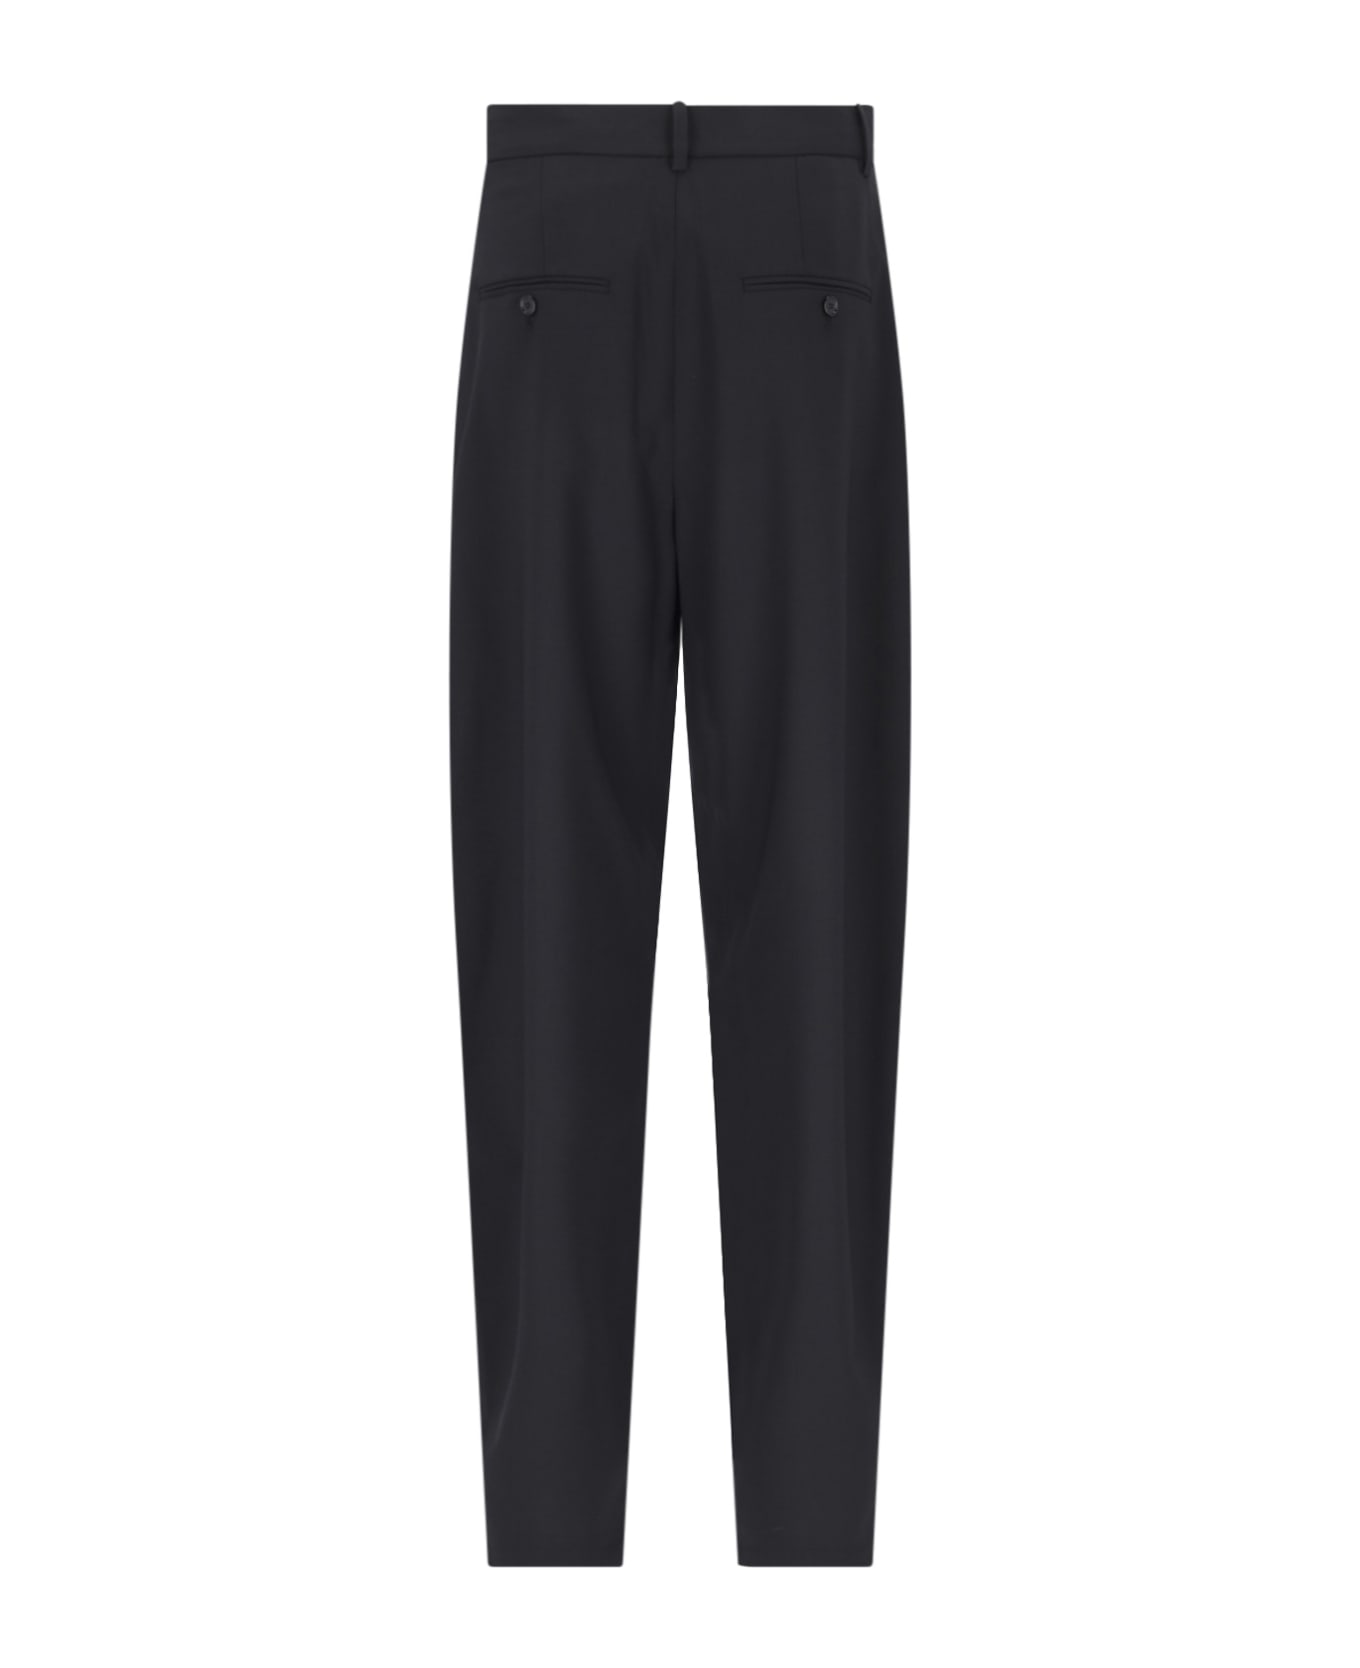 Isabel Marant Pleated Tailored Trousers - Black ボトムス